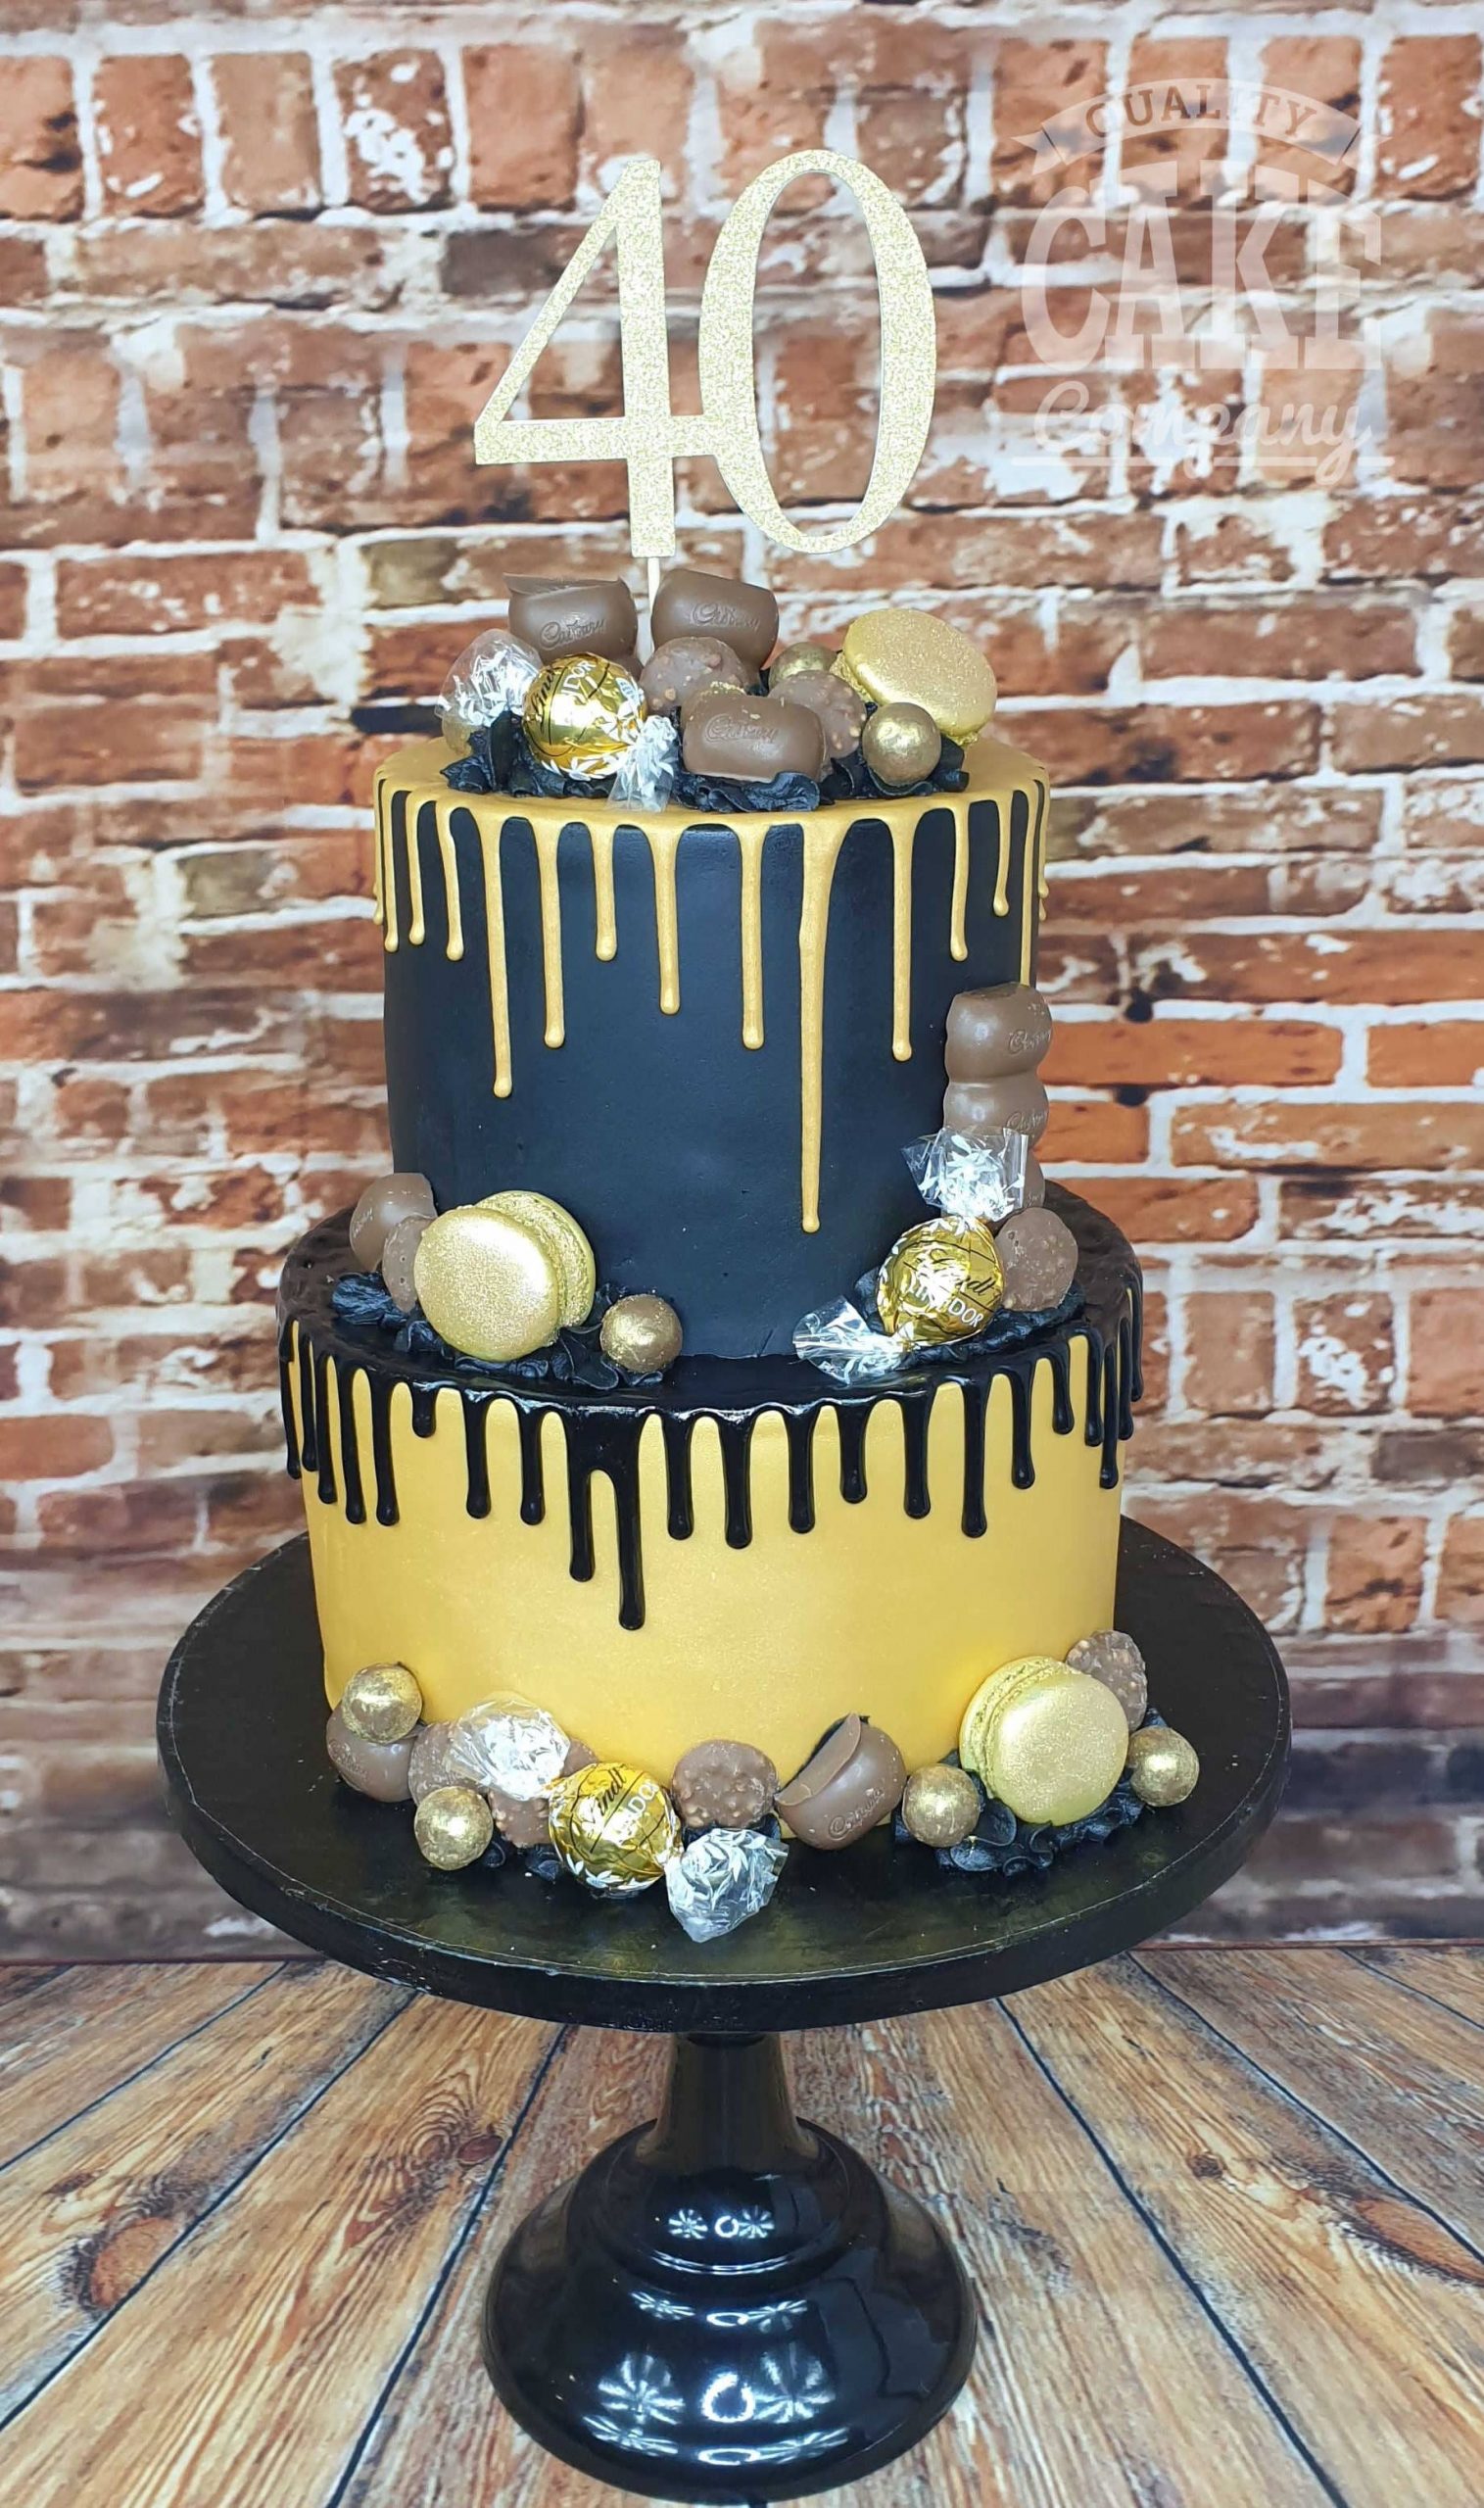 No Deco, Clean Icing Tier Cake – D'avant Bakery